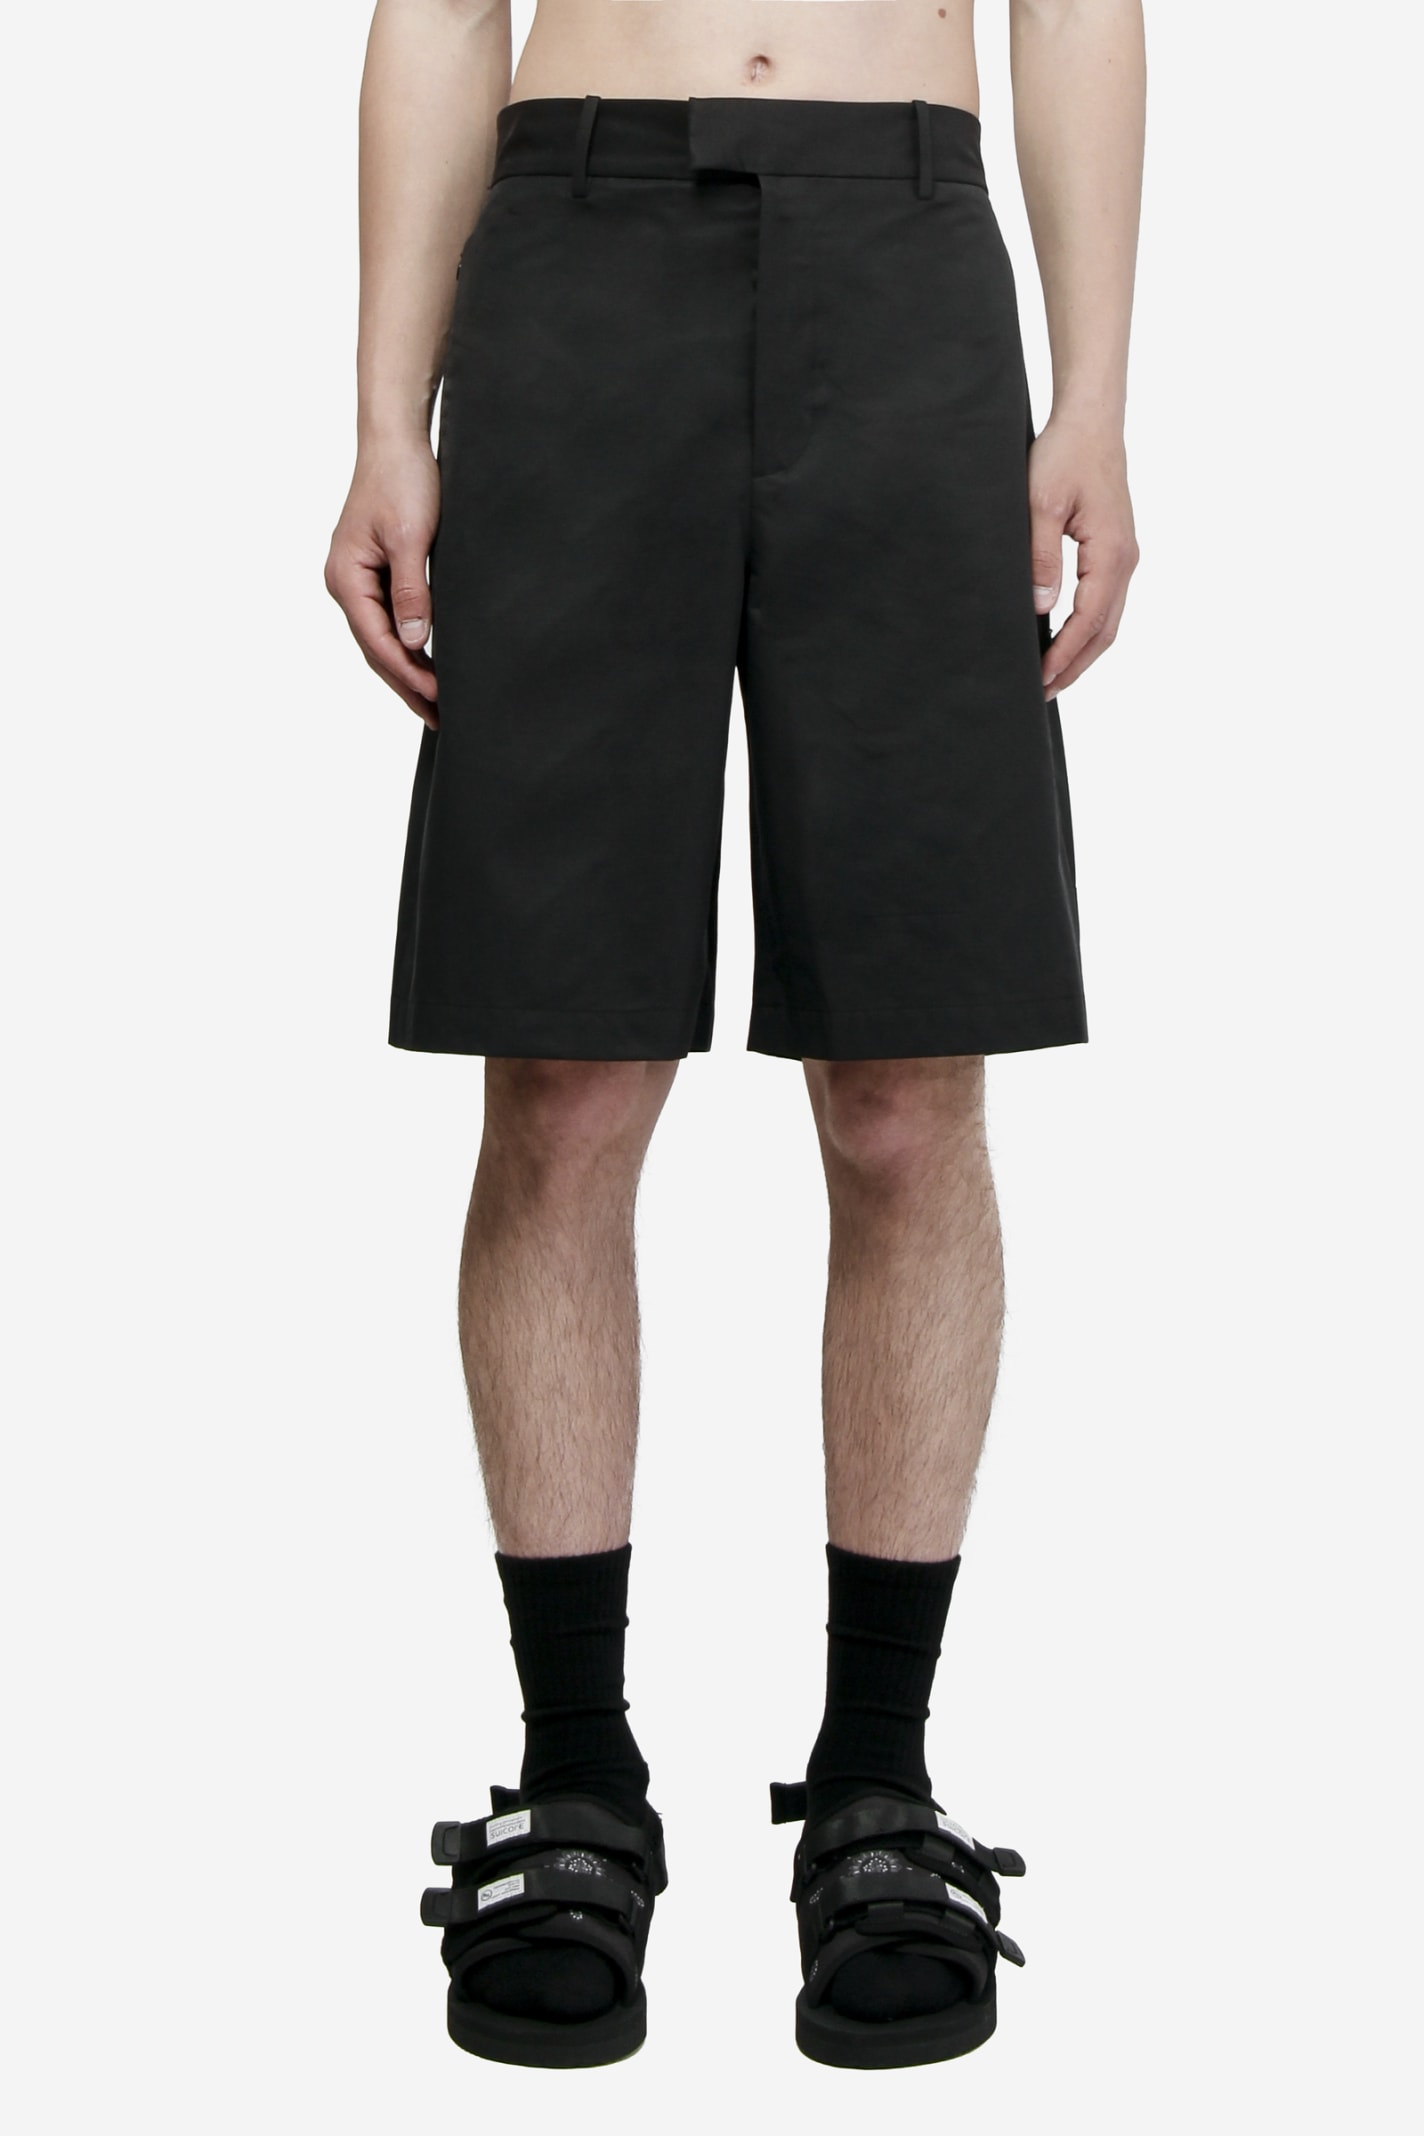 A-COLD-WALL Treated Wide Shorts